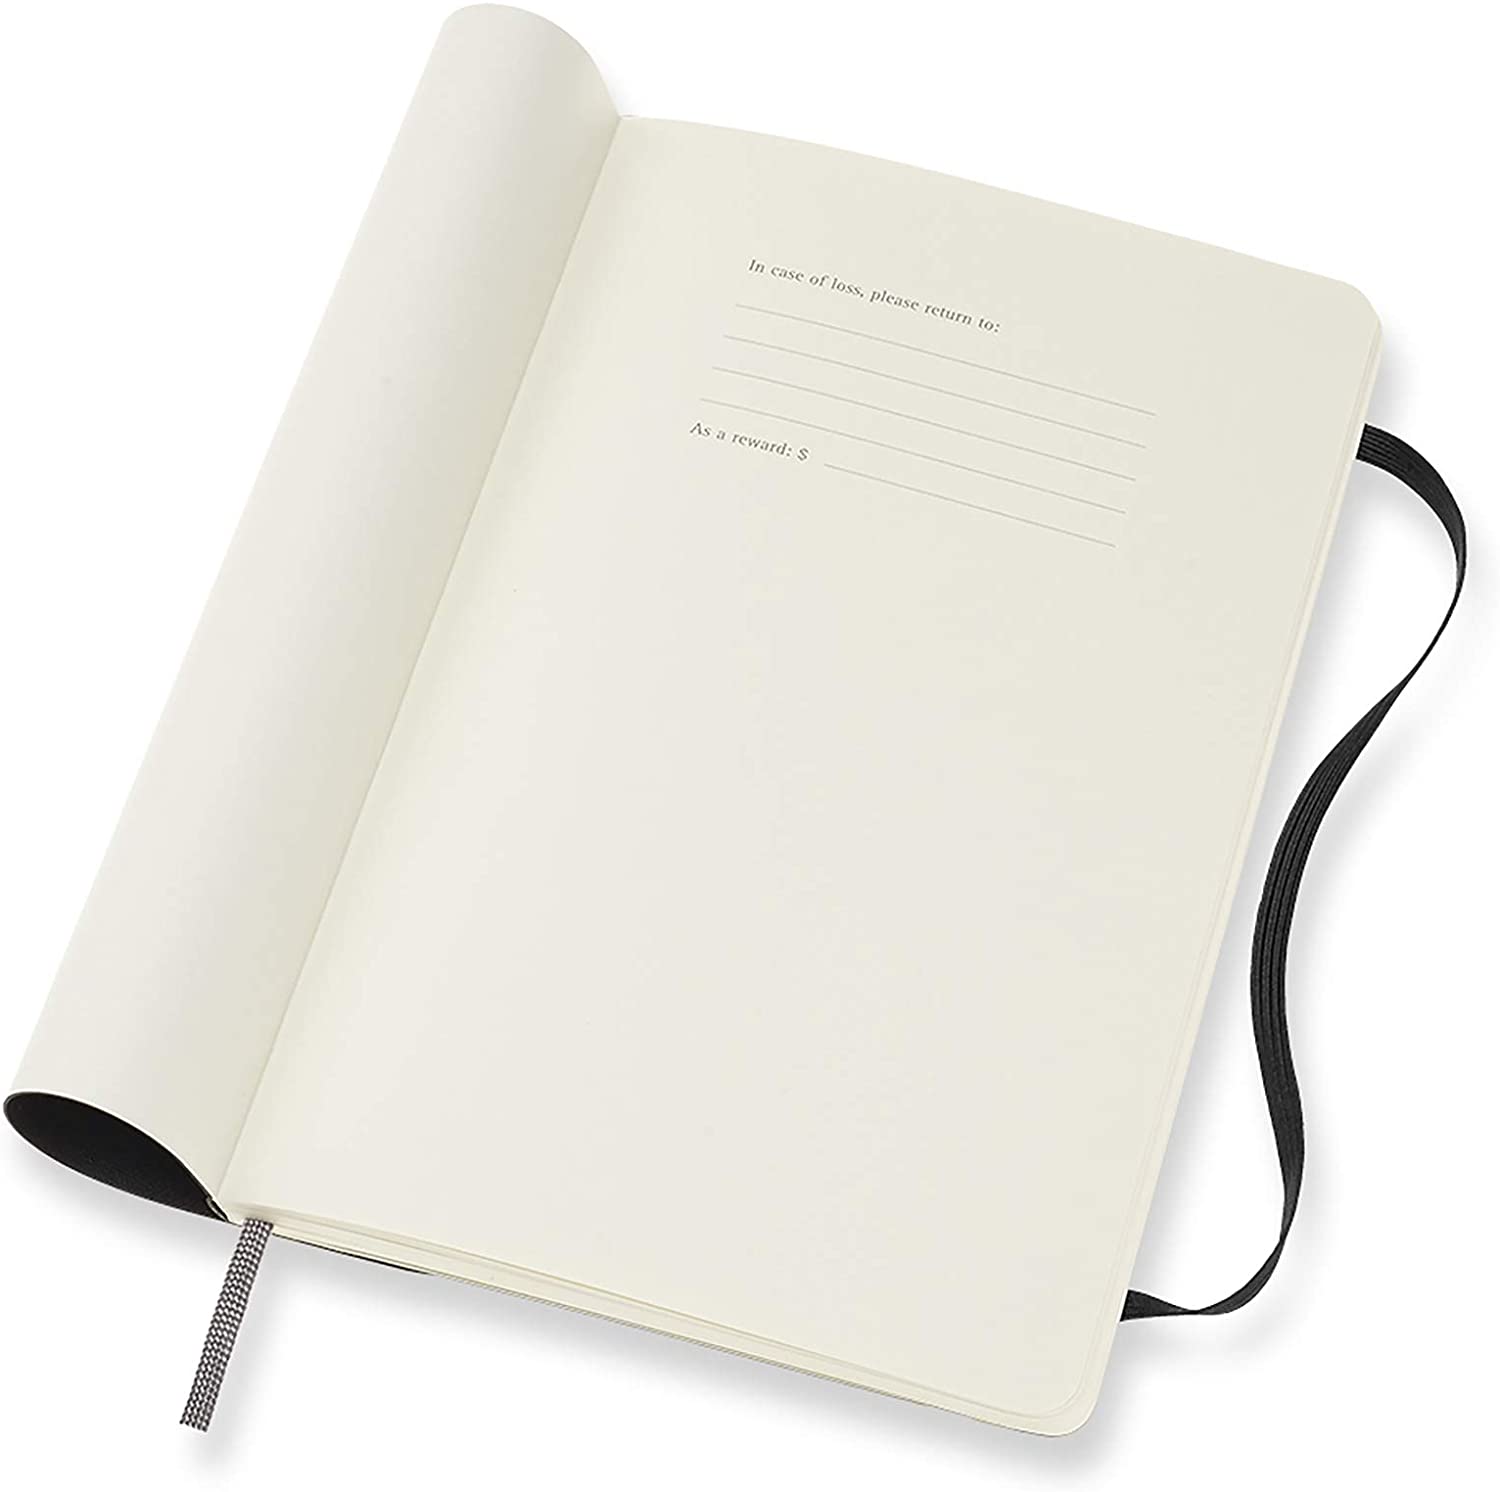 Moleskine - 12 Months Agenda Weekly Horizontal 2020  -  Soft Cover and Elastic Closure - Black Color - Large 13 x 21 cm - 144 Pages